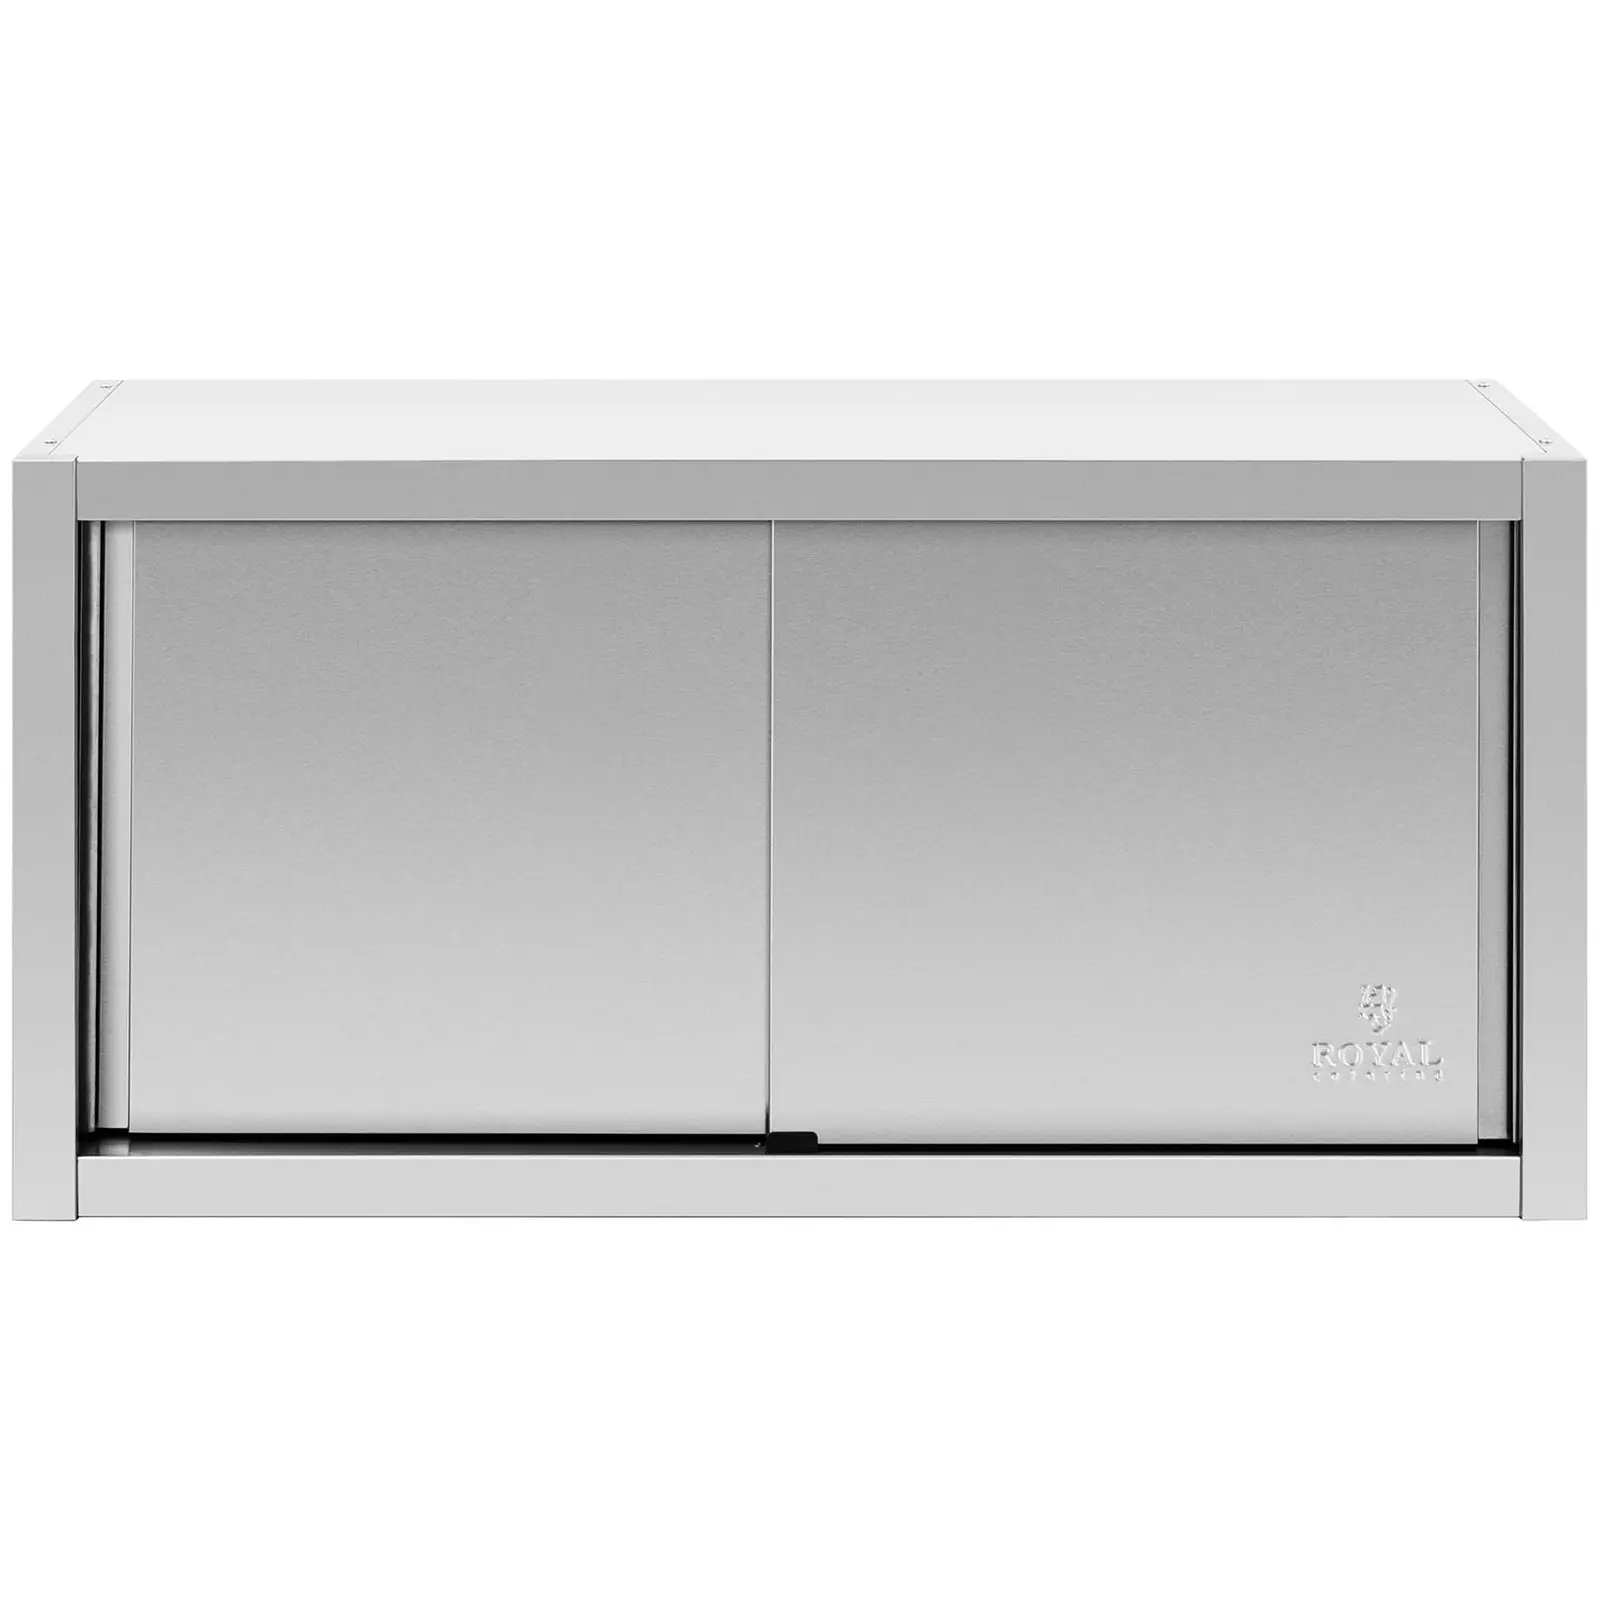 Stainless Steel Hanging Cabinet - 120 x 45 cm